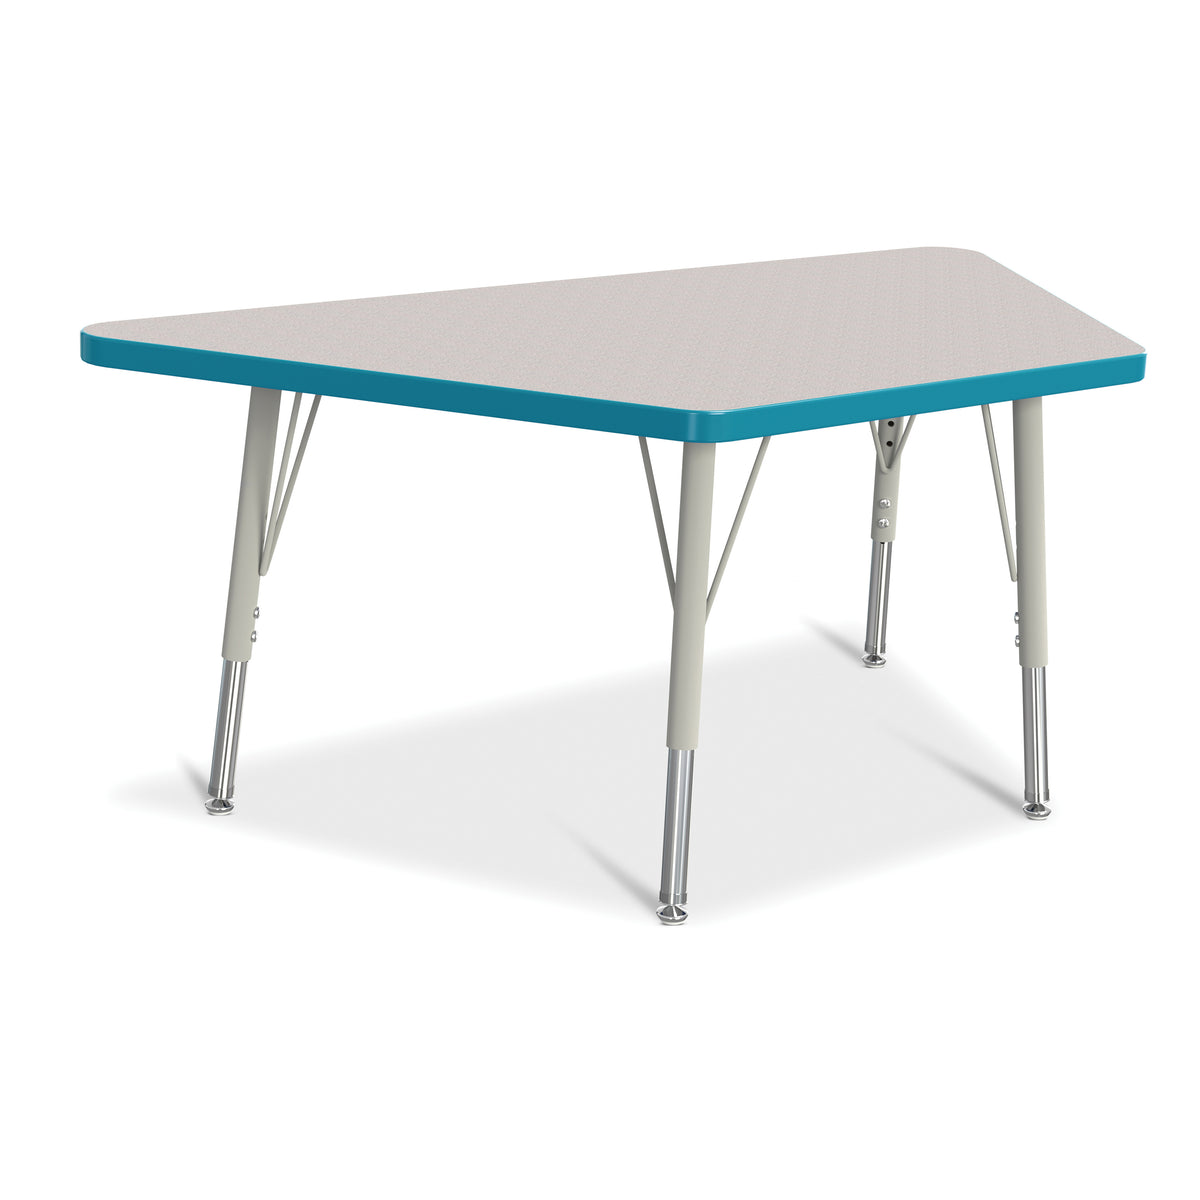 6438JCE005, Berries Trapezoid Activity Tables - 24" X 48", E-height - Freckled Gray/Teal/Gray